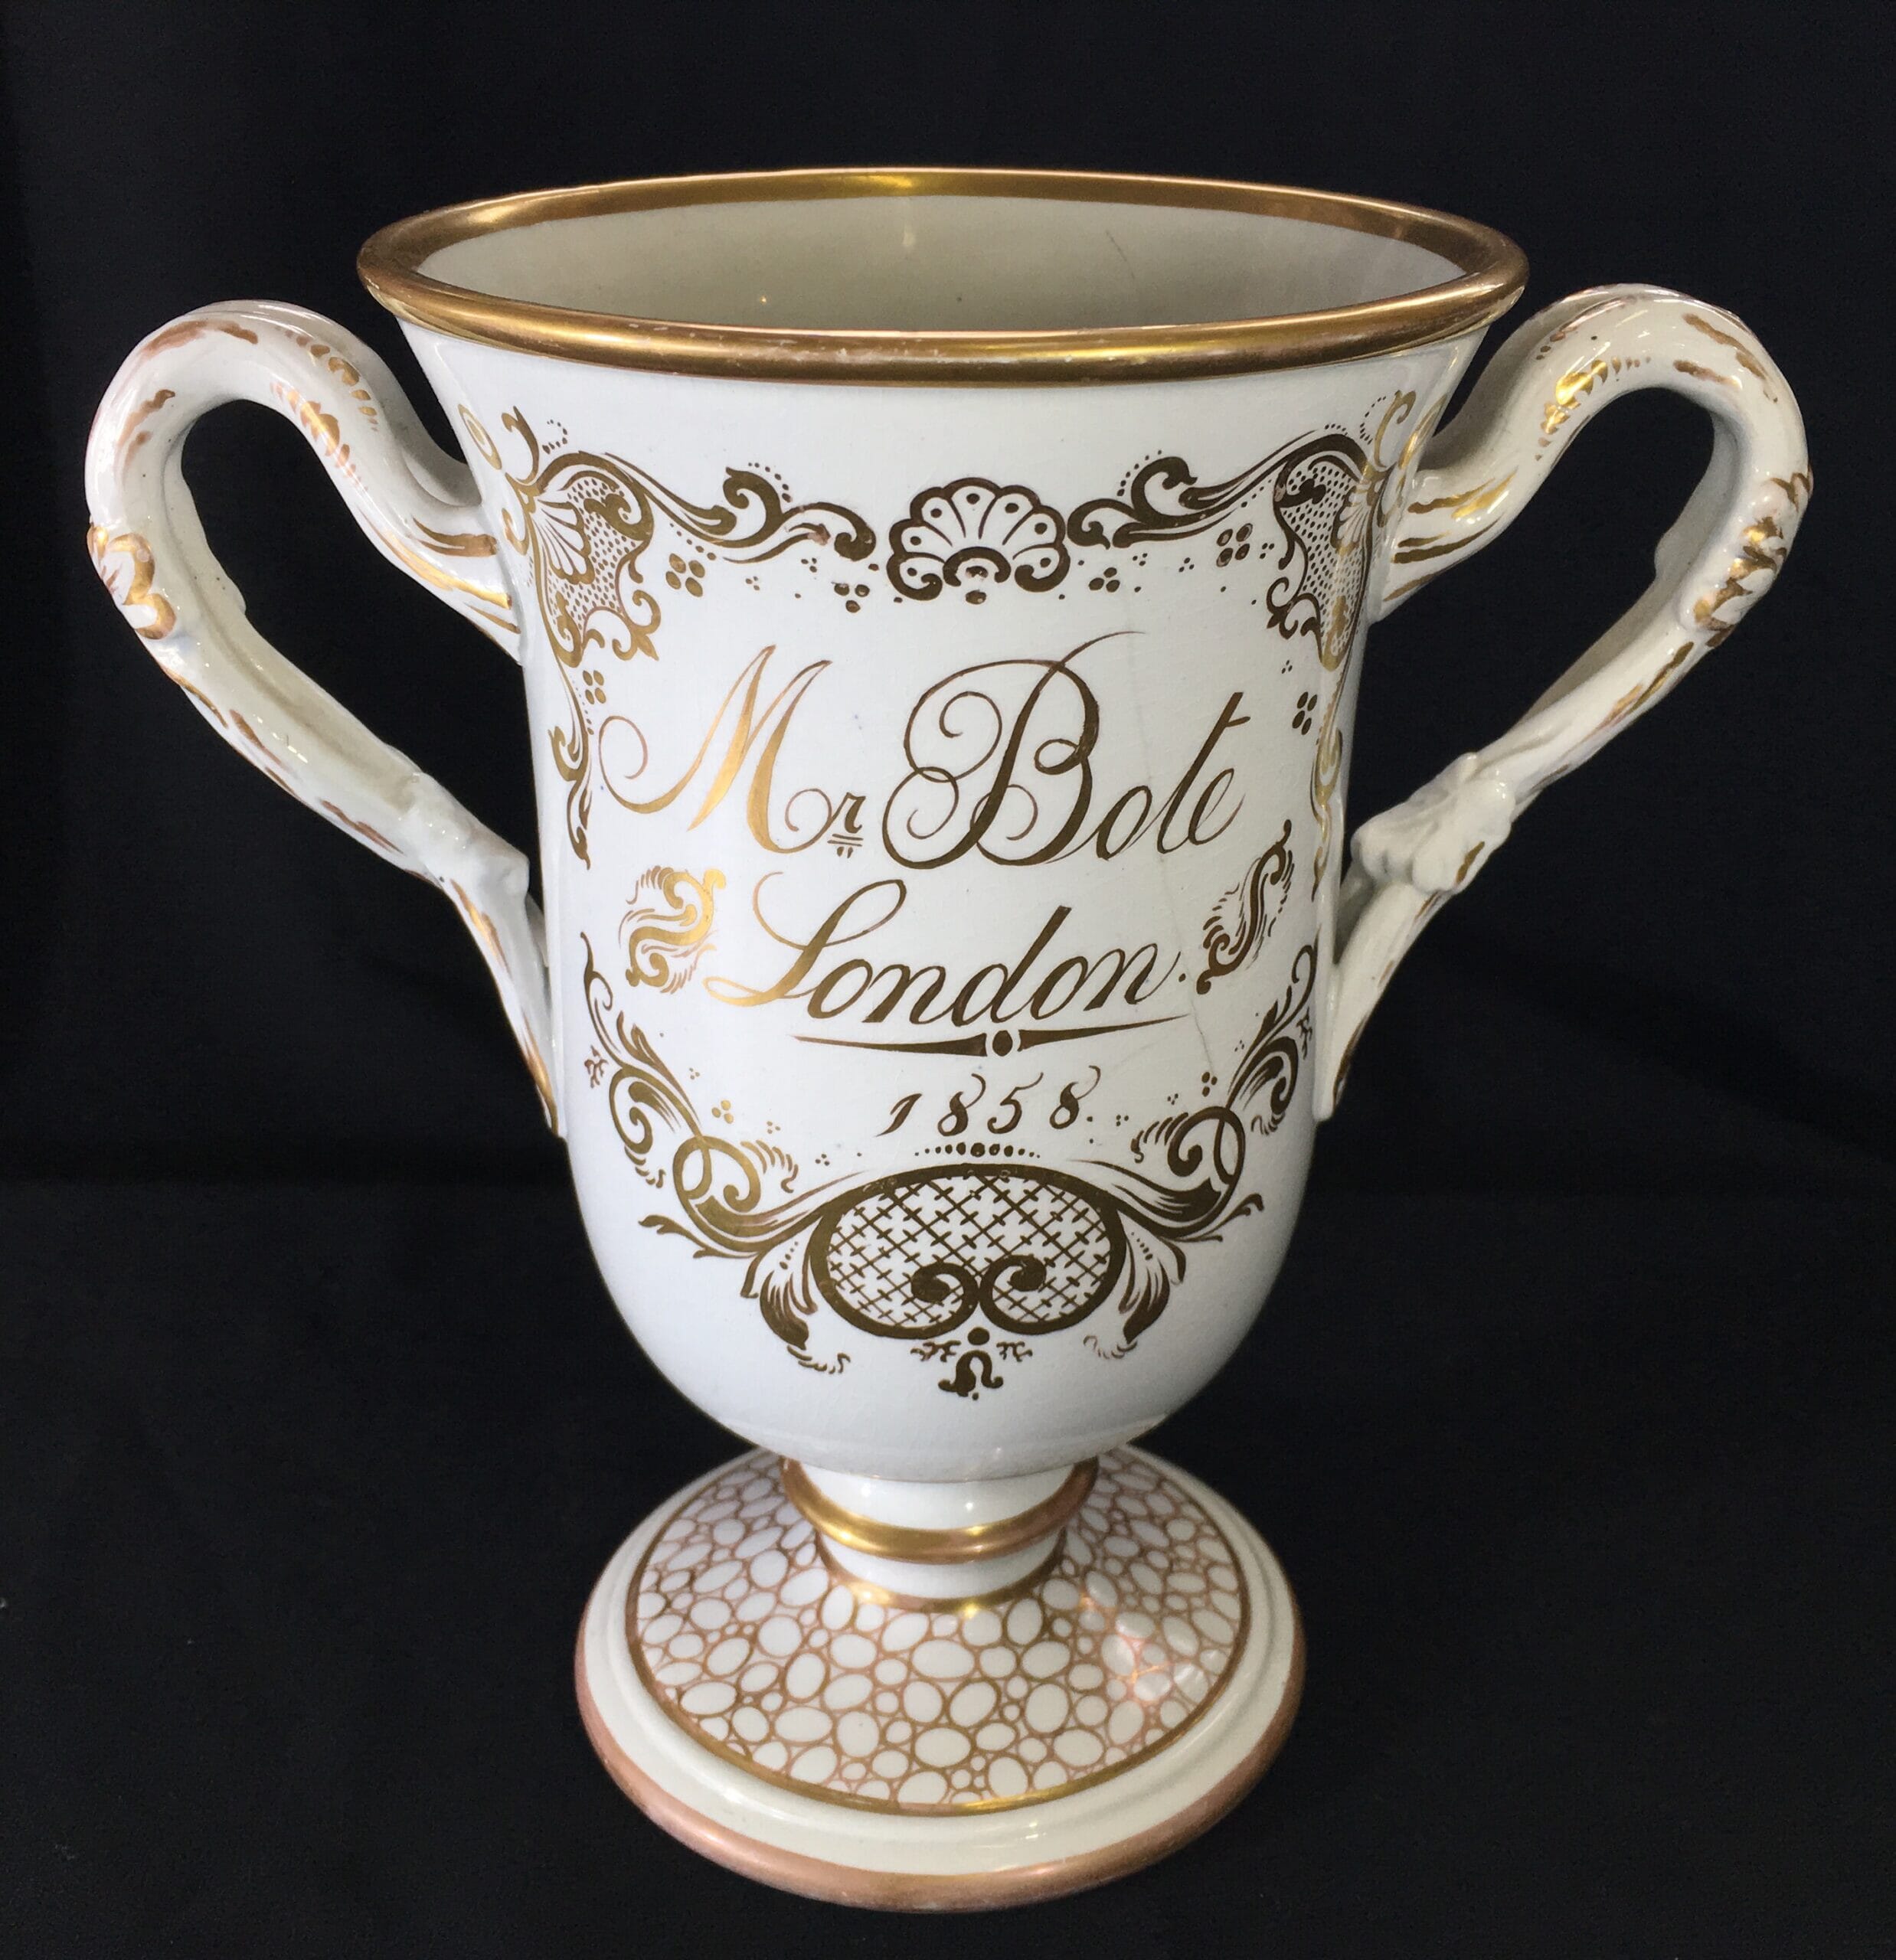 Staffordshire pottery presentation cup dated 1858 -0